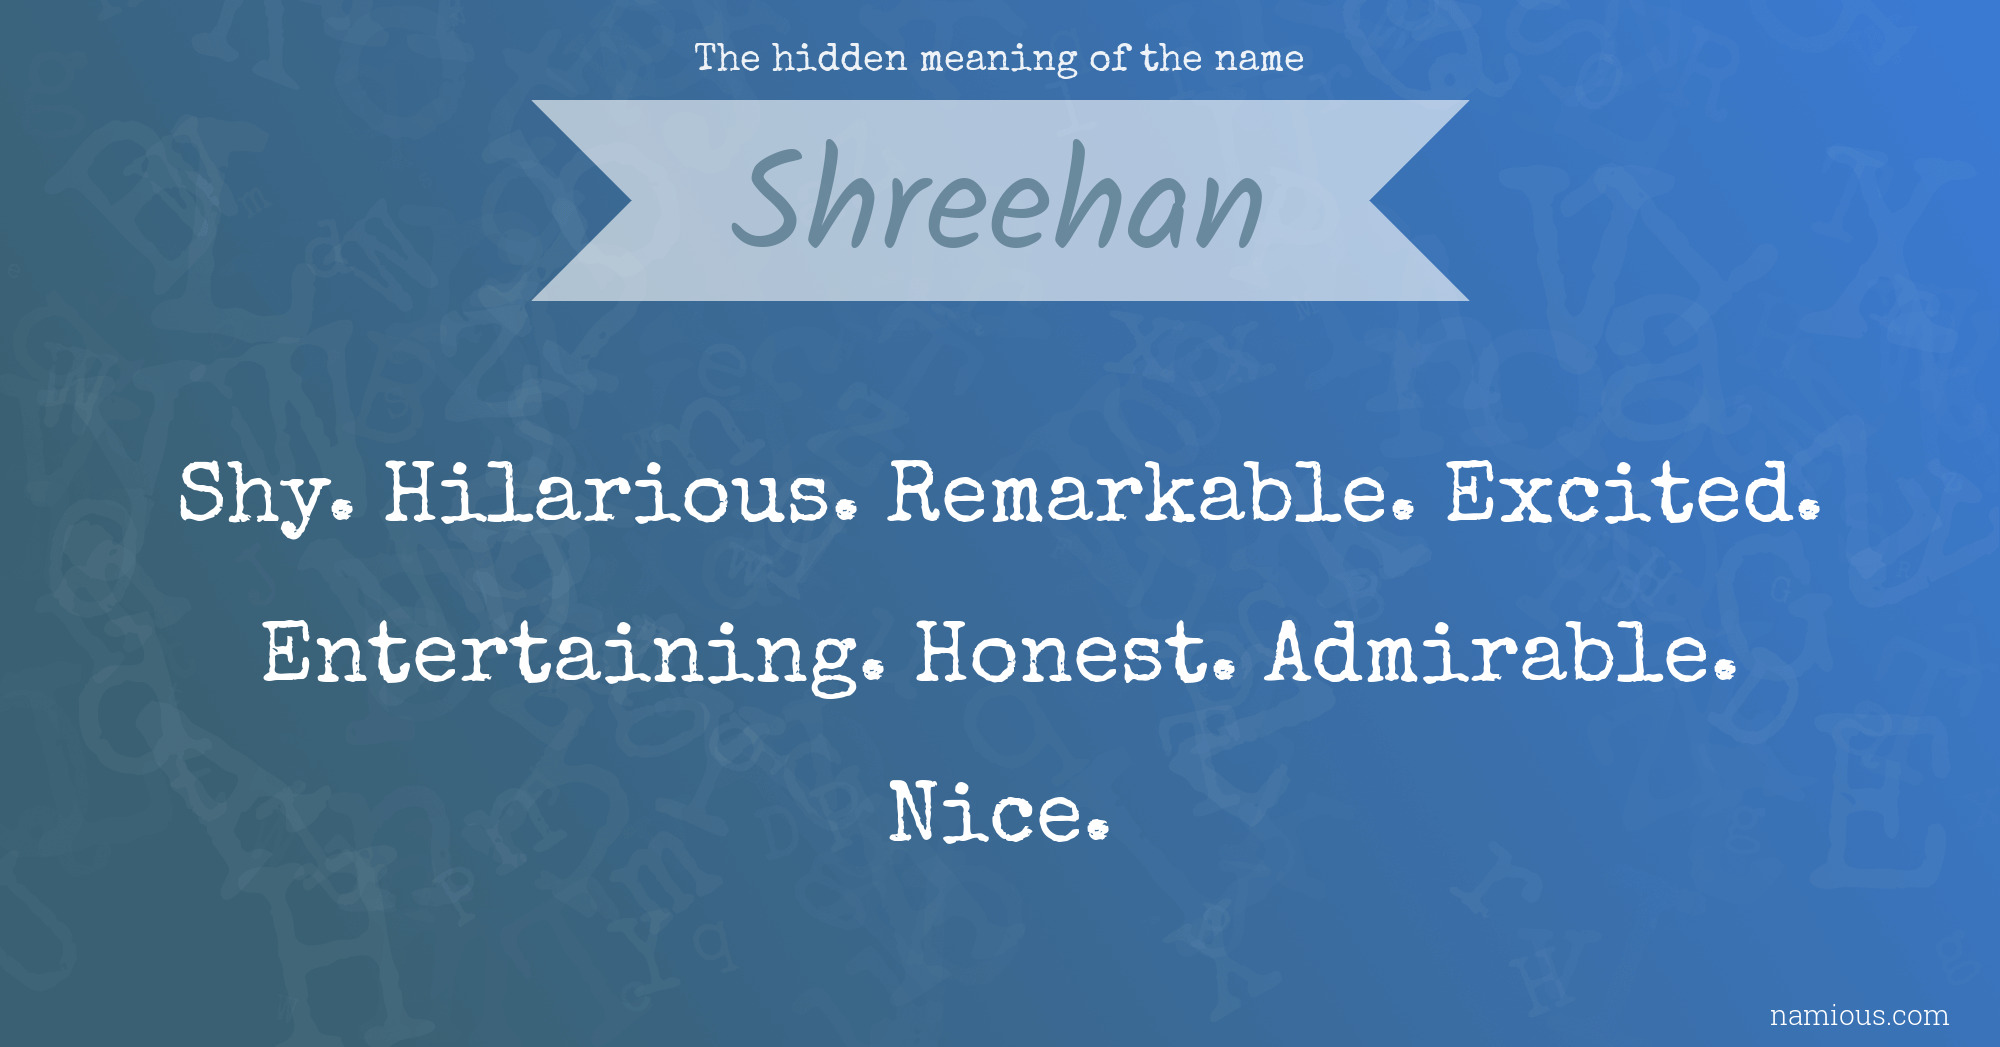 The hidden meaning of the name Shreehan